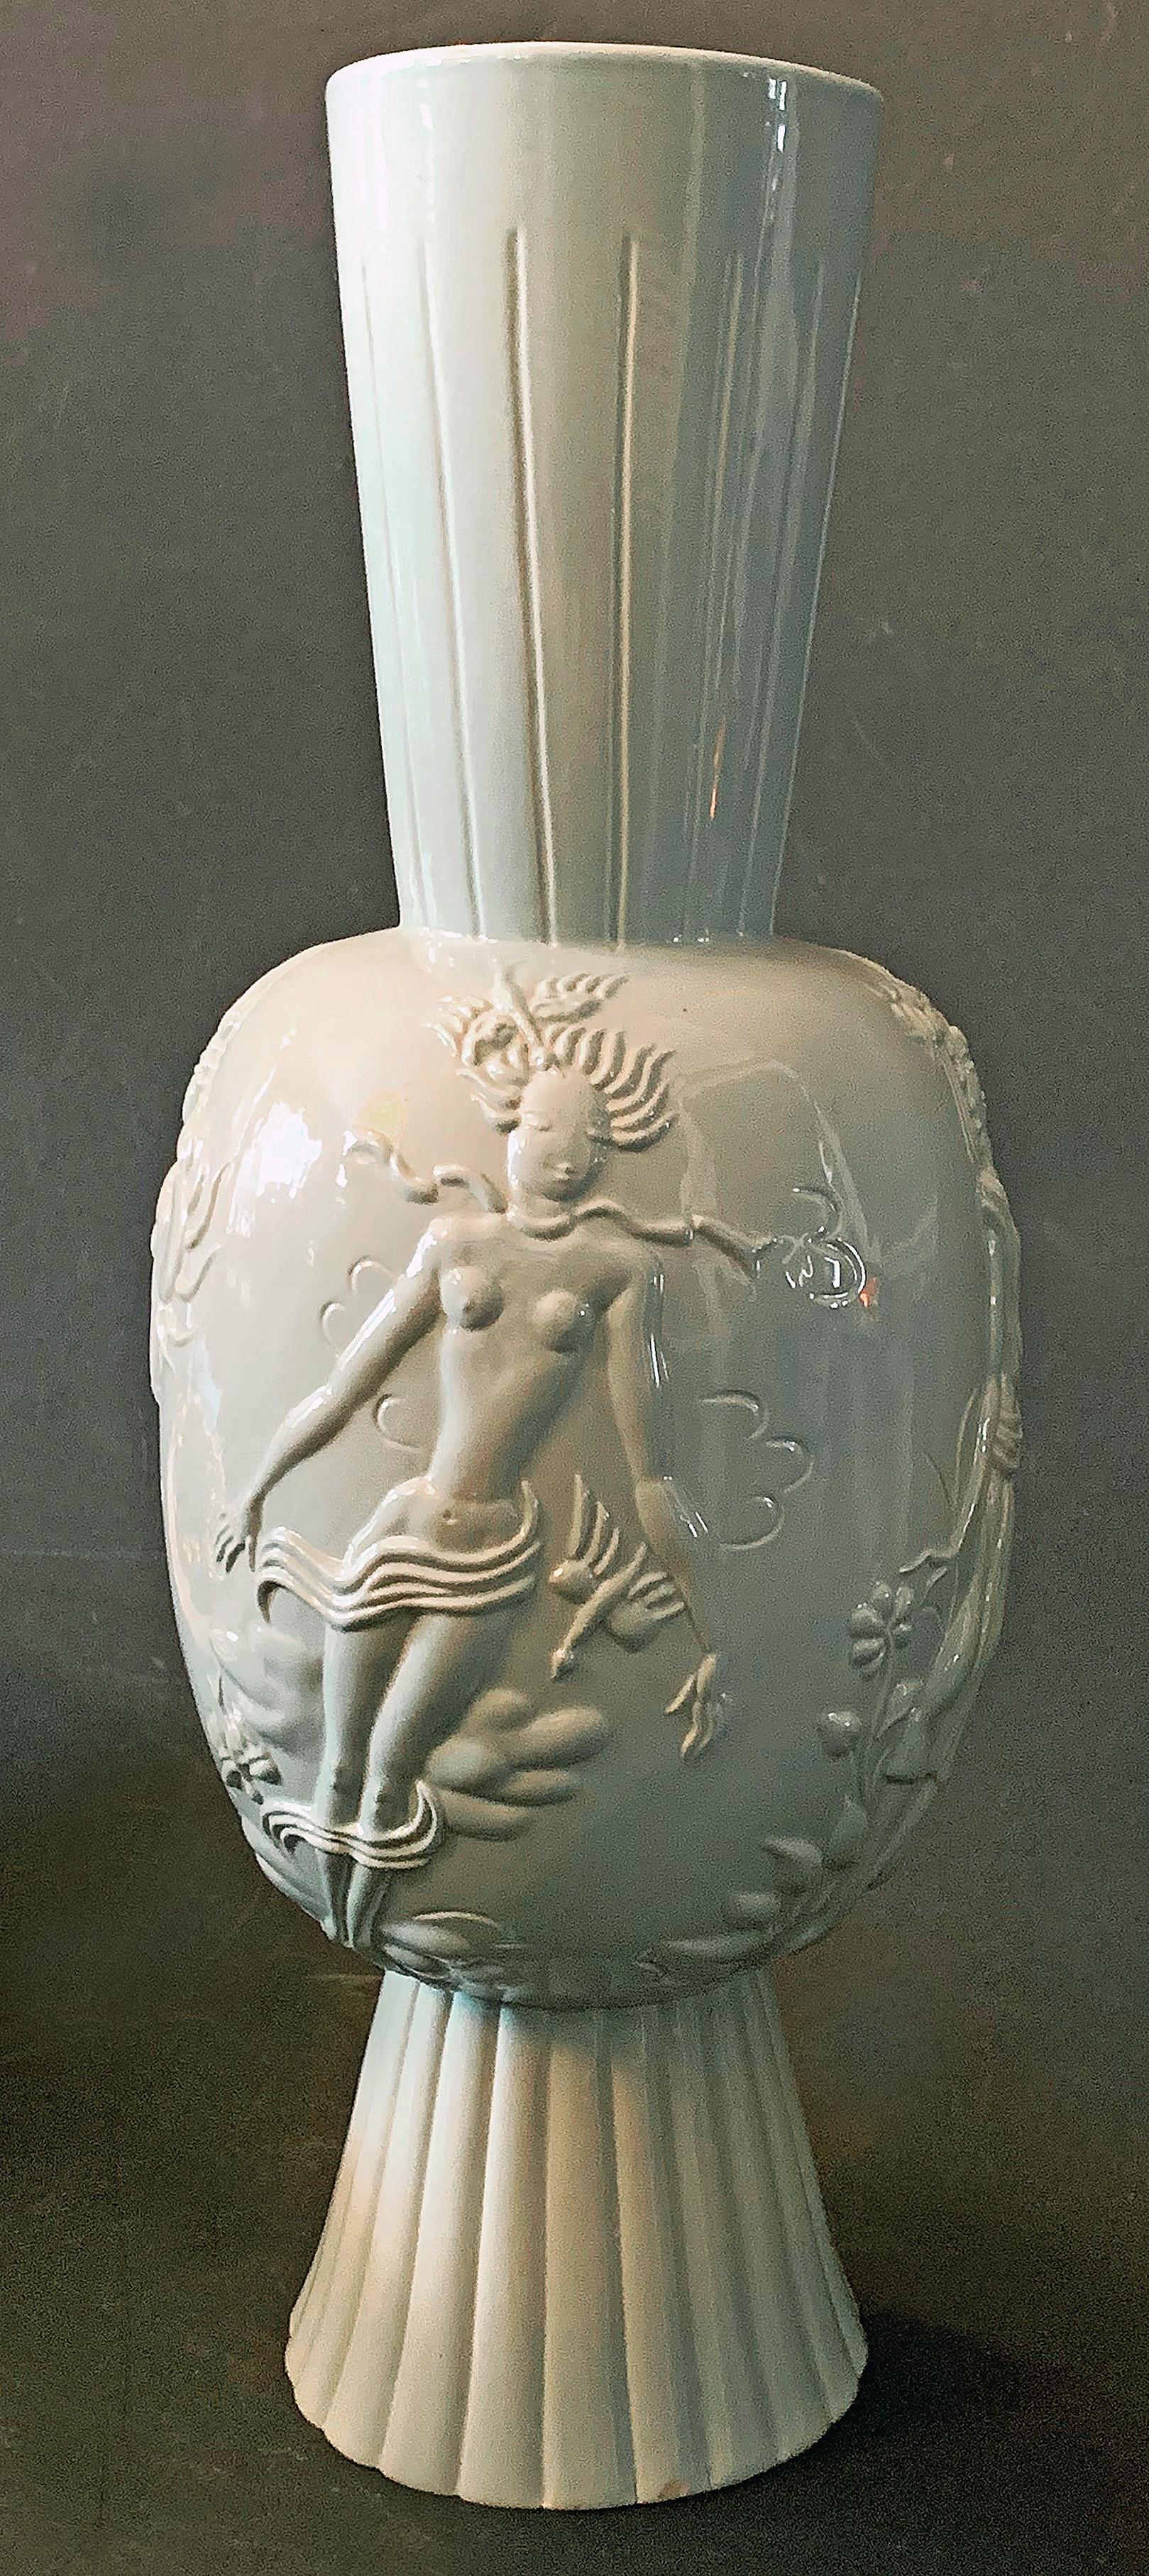 Sculpted, fired and glazed by one of the Vienna Werkstatte's greatest artists -- Wally (or Vally) Wieselthier -- after she emigrated to America, this tall, extraordinary vase depicts the four elements -- water, air, fire and earth. Each of the